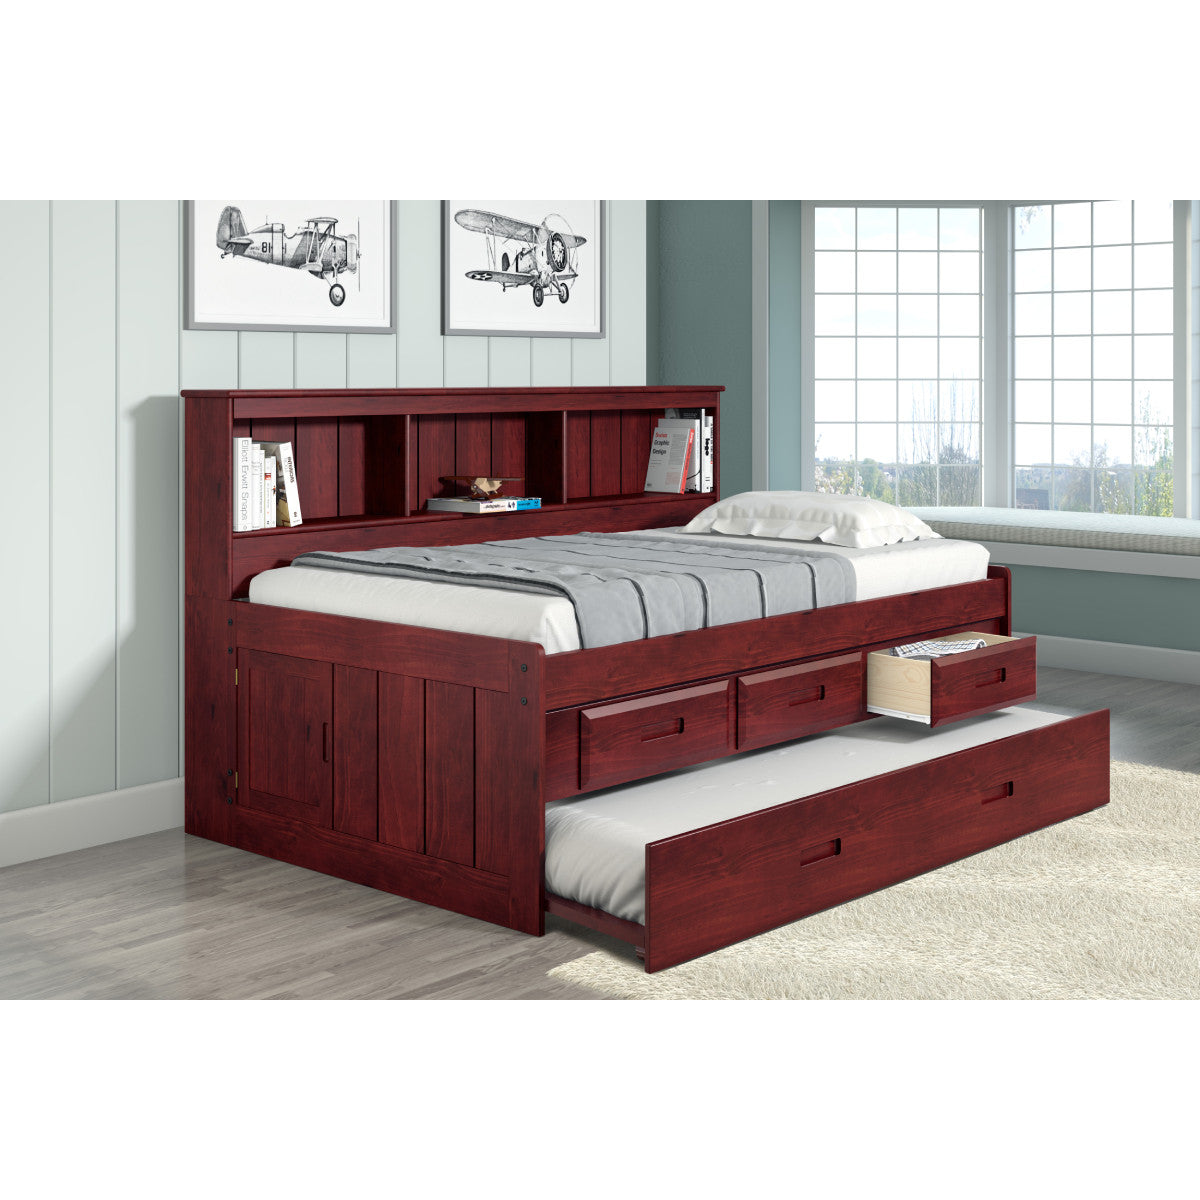 TWIN DAYBED BOOKCASE CAPTAINS BED WITH 3 DRAWER STORAGE AND TWIN TRUNDLE IN MERLOT FINISH